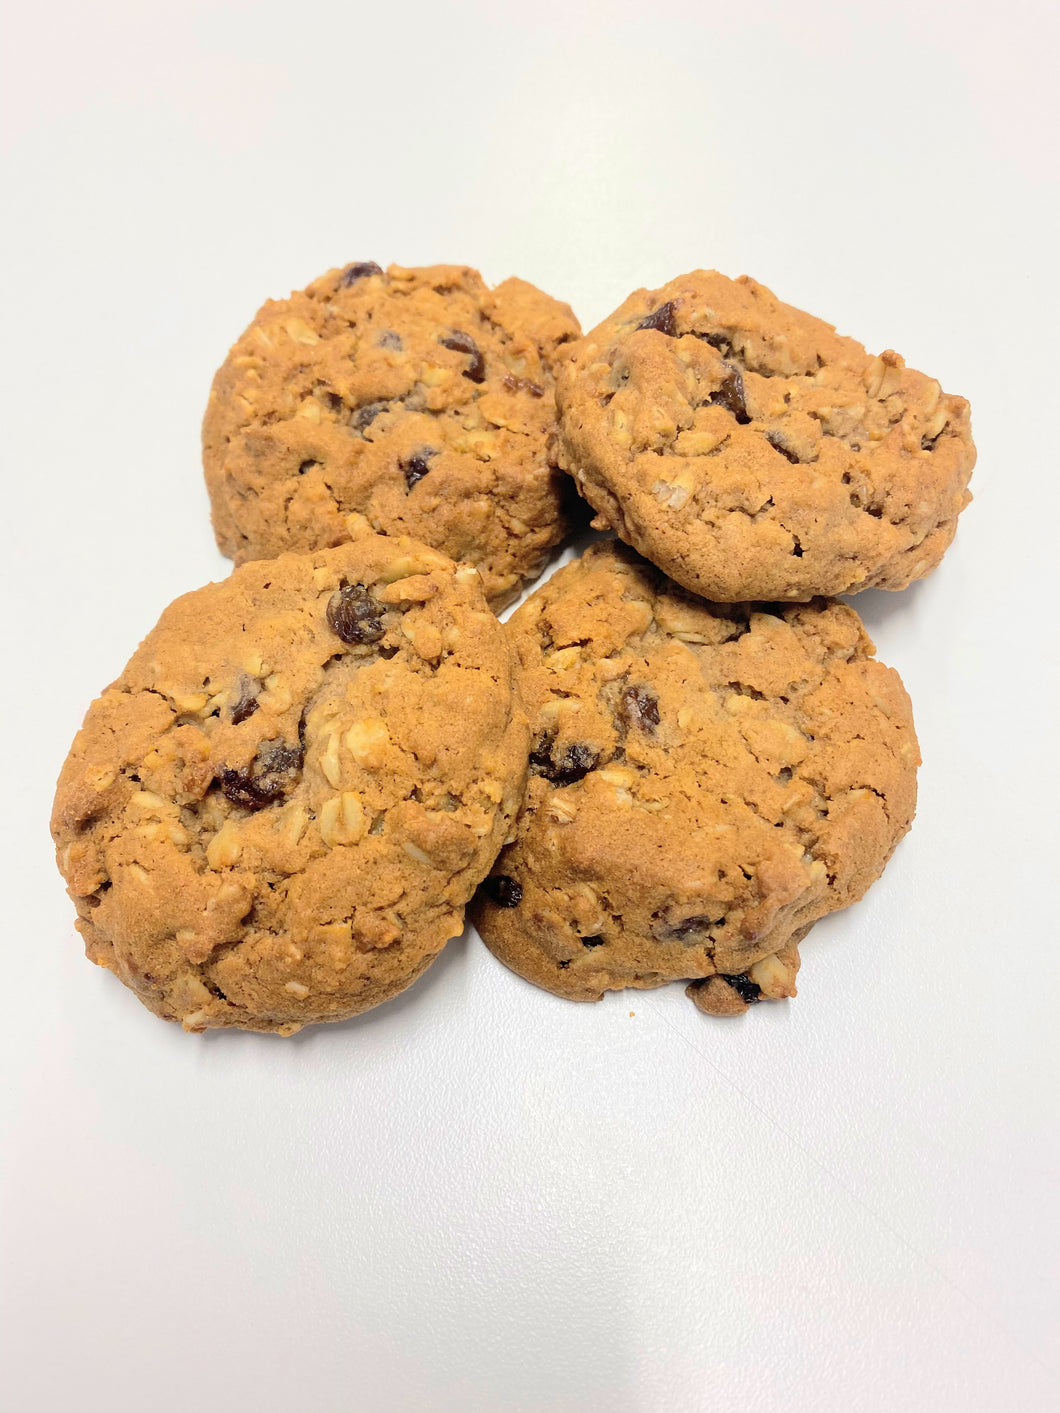 Oatmeal raisin cookie 6pk - The Cookie DOH! Factory